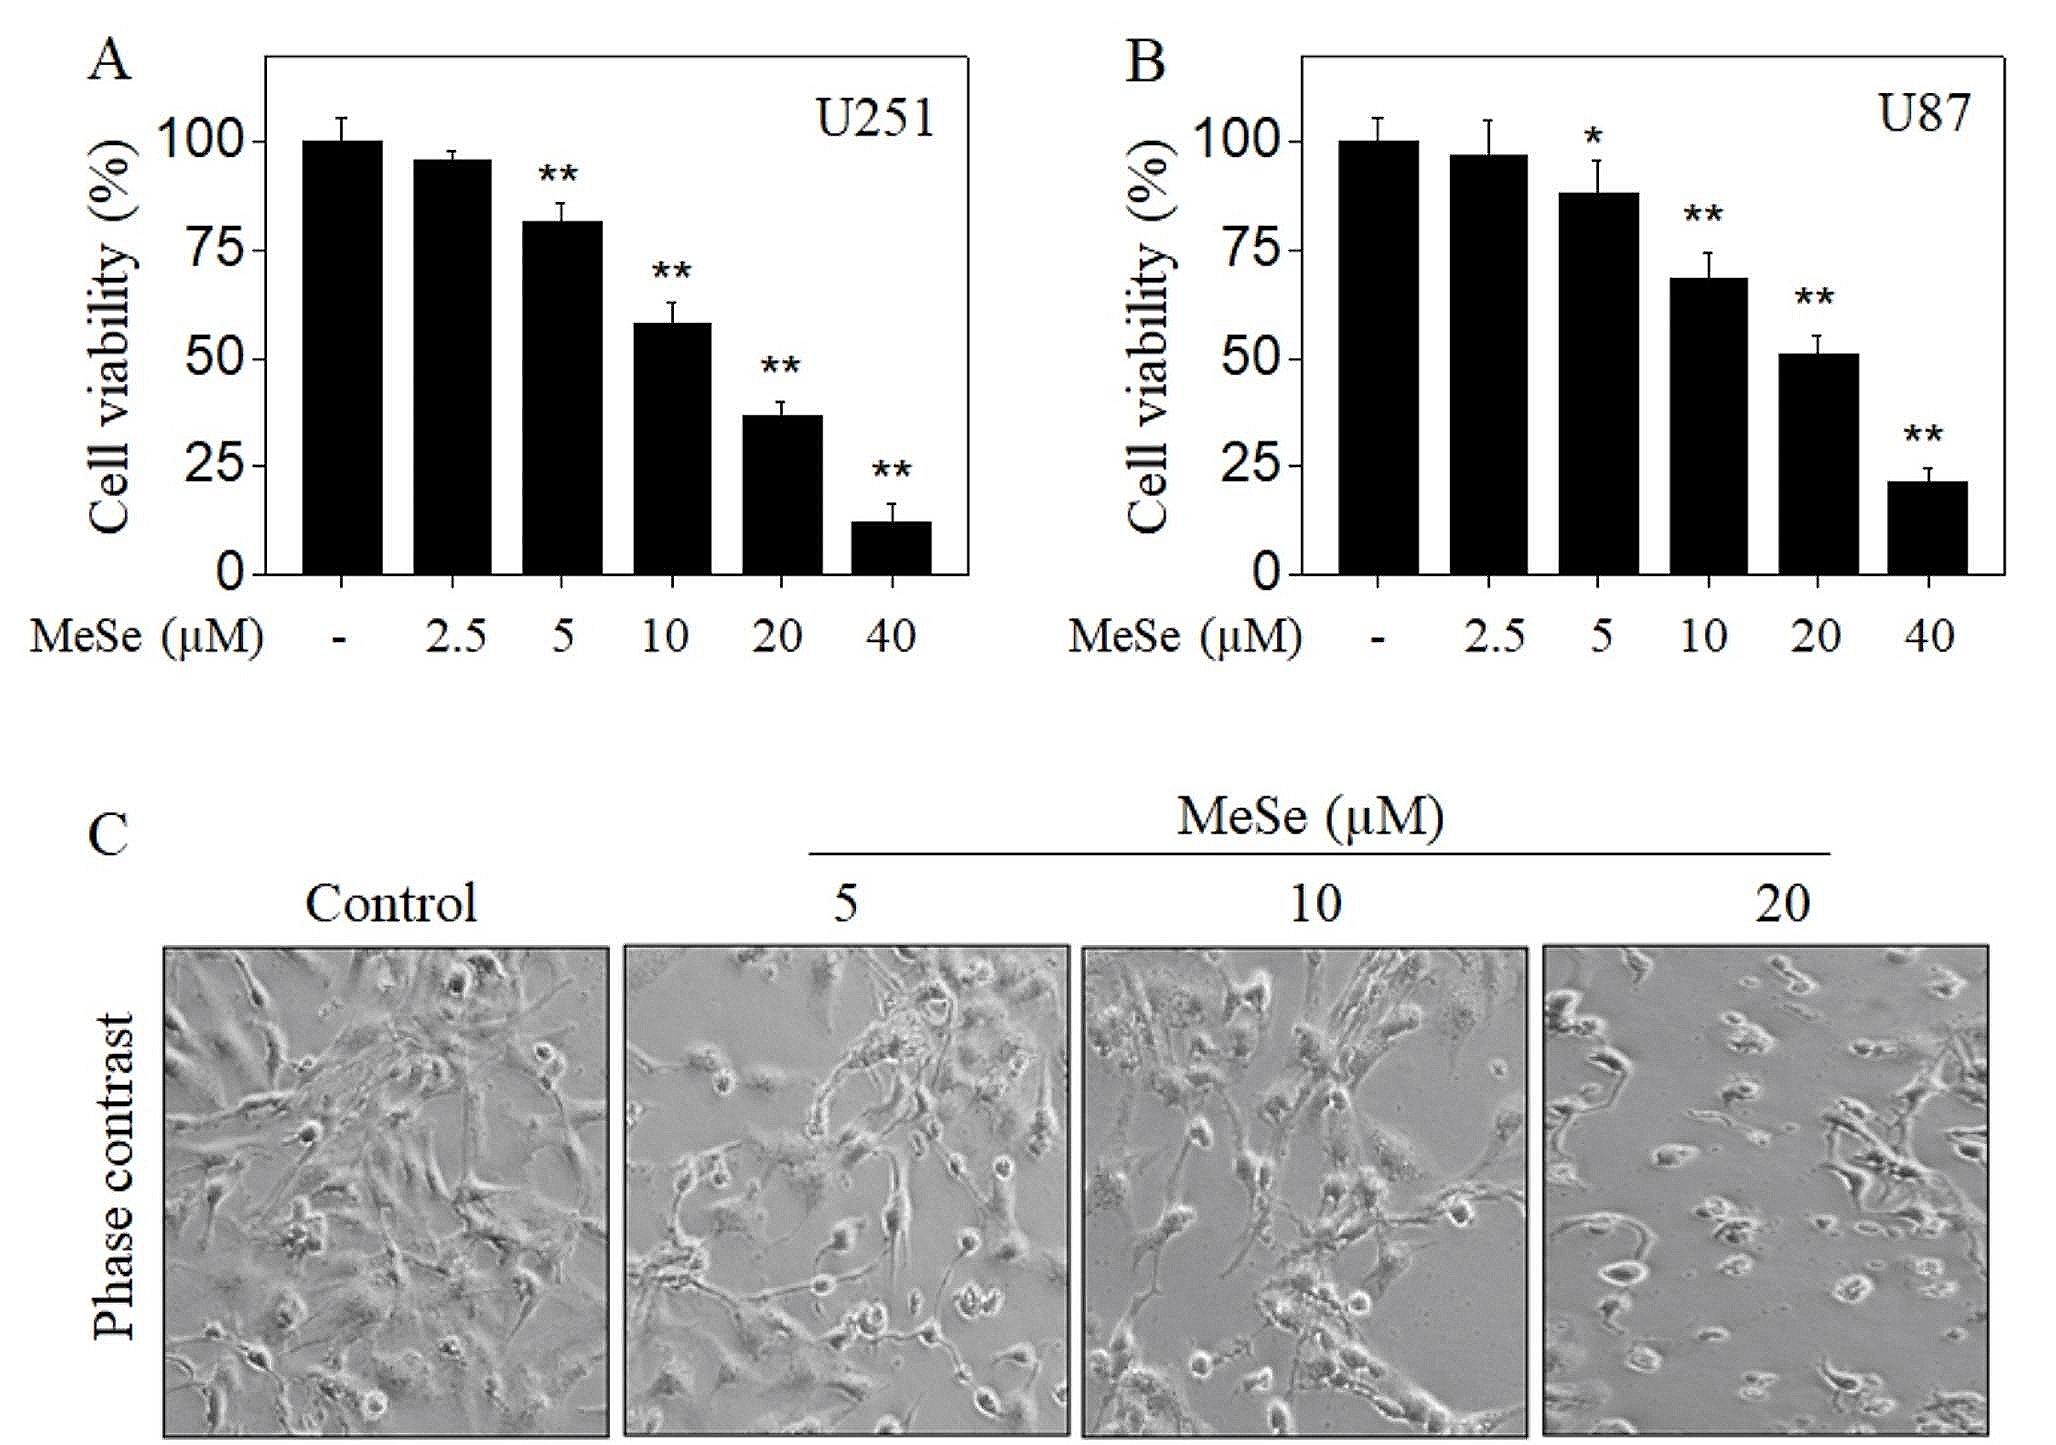 Methylseleninic acid inhibits human glioma growth in vitro and in vivo by triggering ROS-dependent oxidative damage and apoptosis